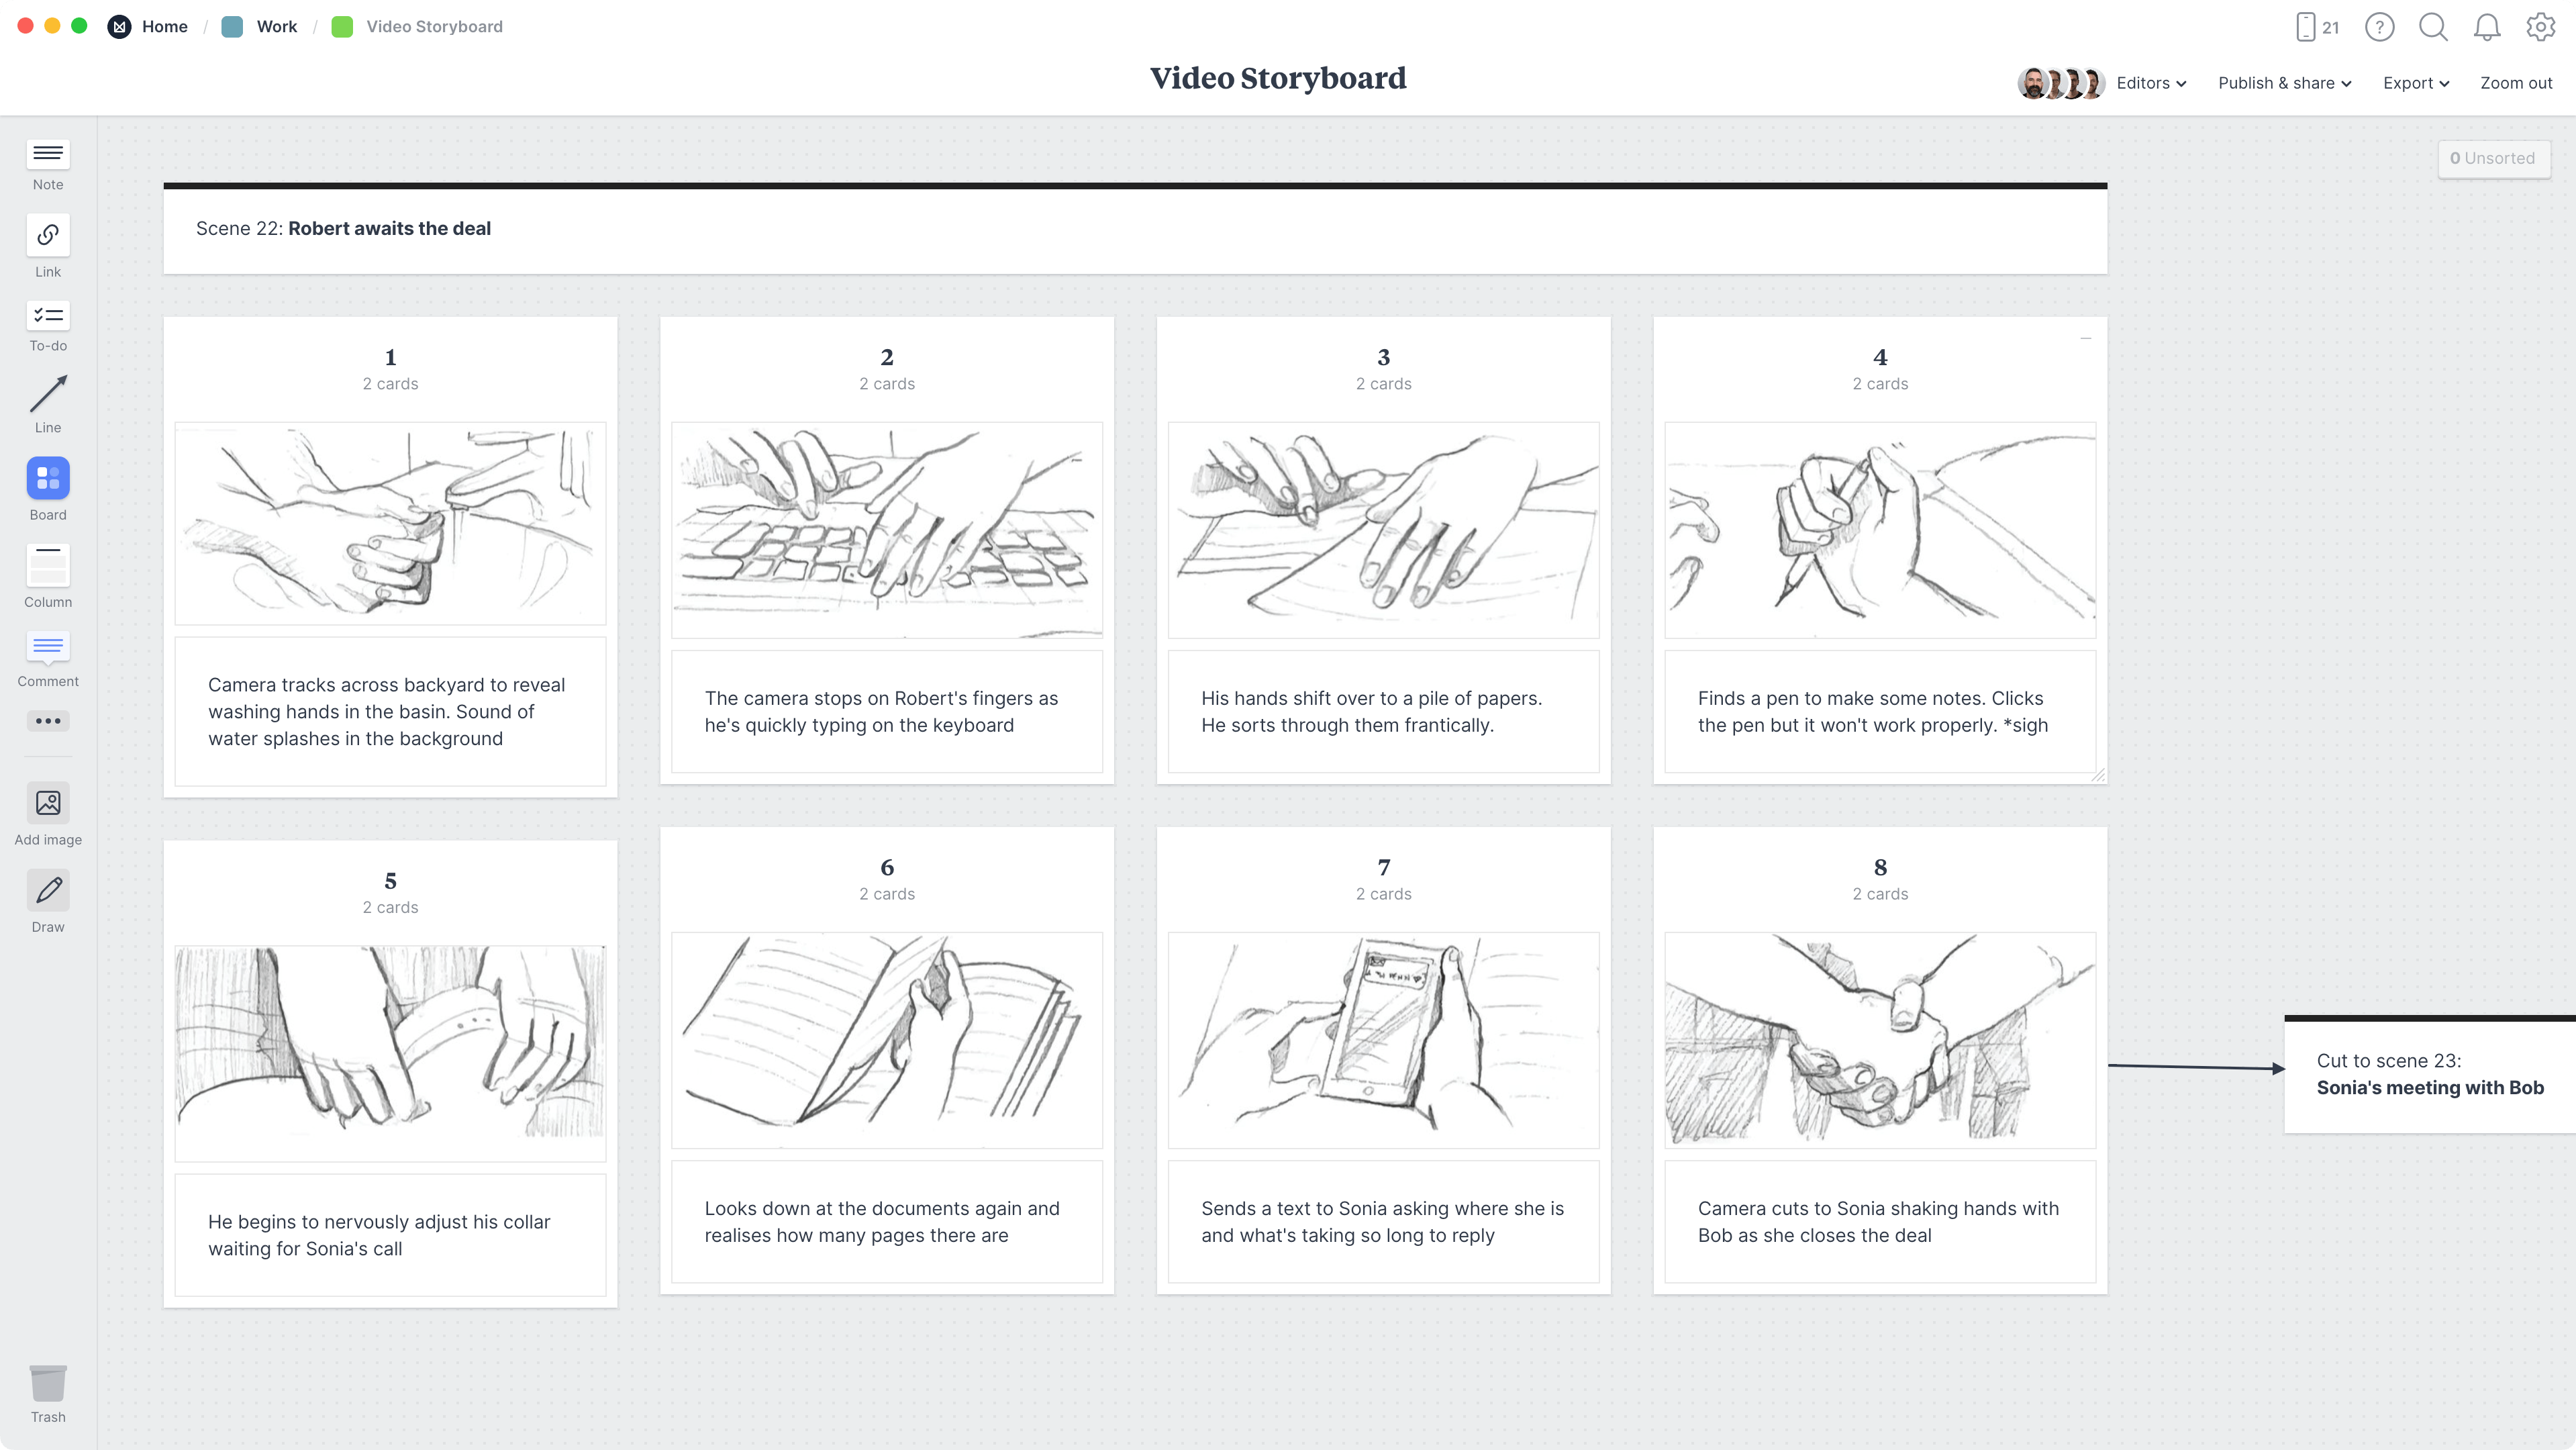 Video storyboard example